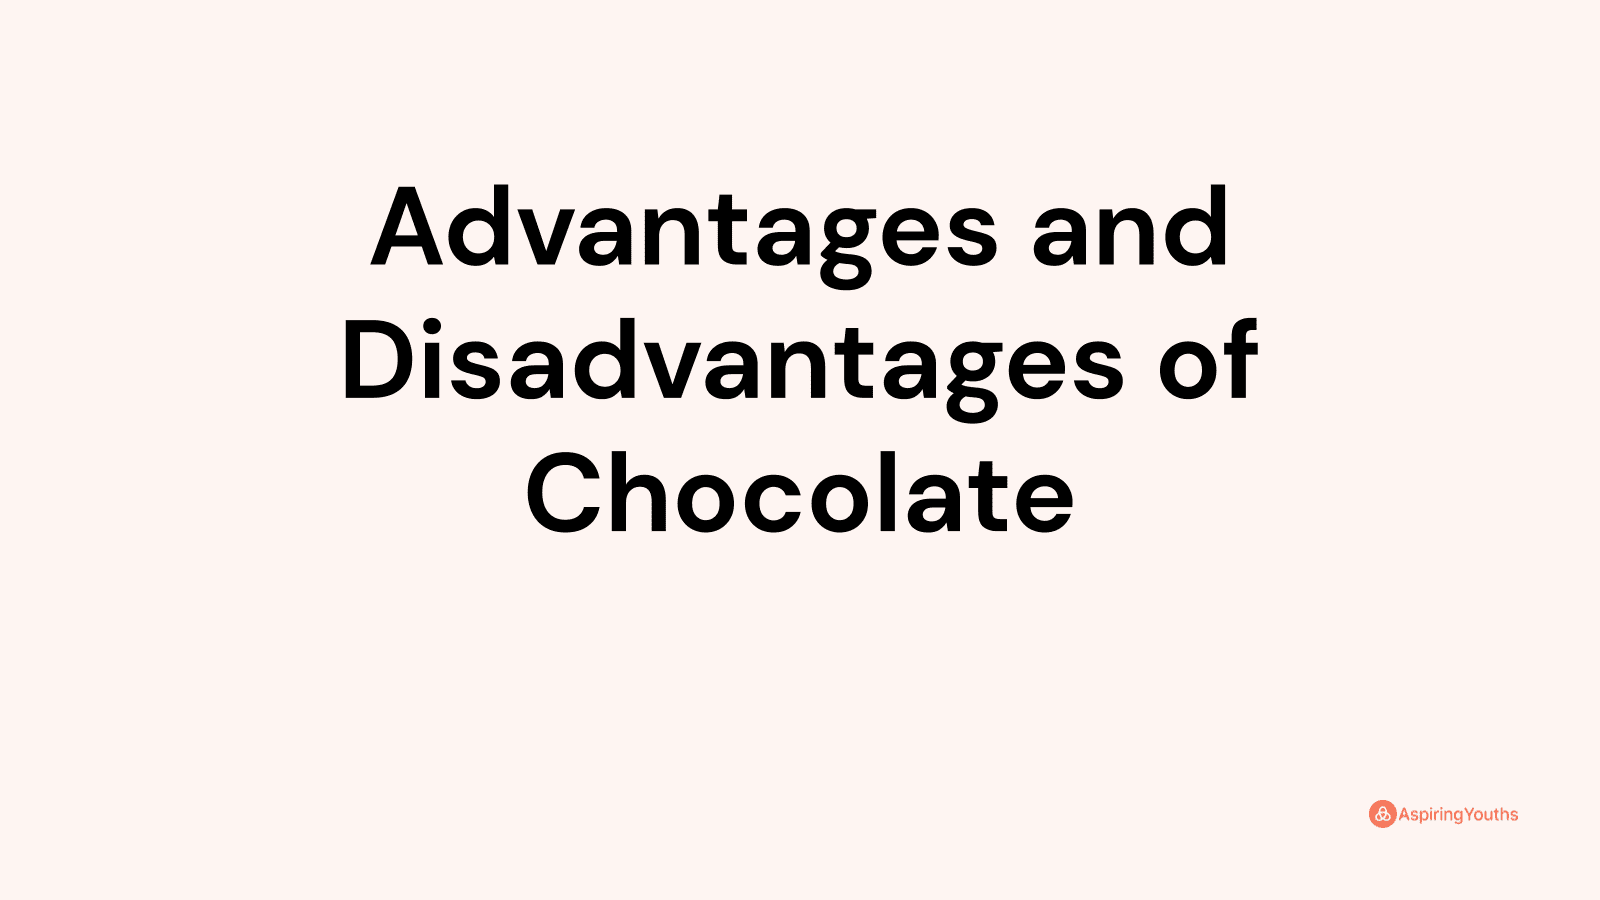 Advantages and disadvantages of Chocolate